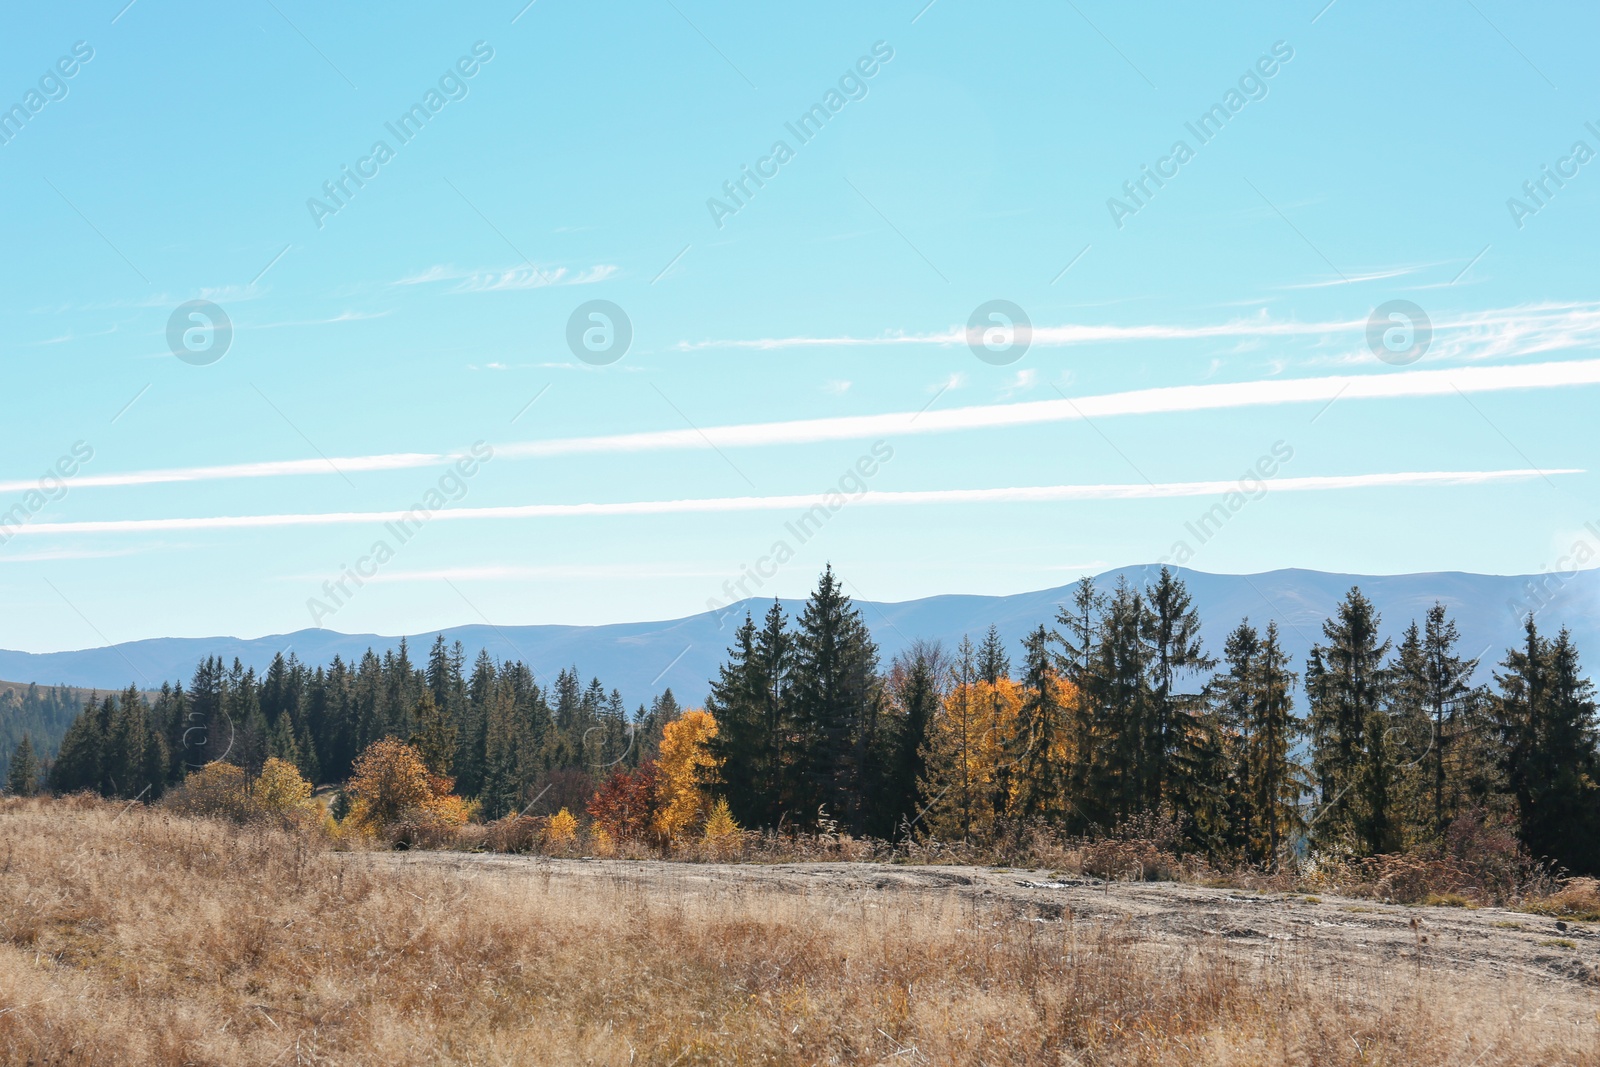 Photo of Picturesque landscape with beautiful forest and mountains